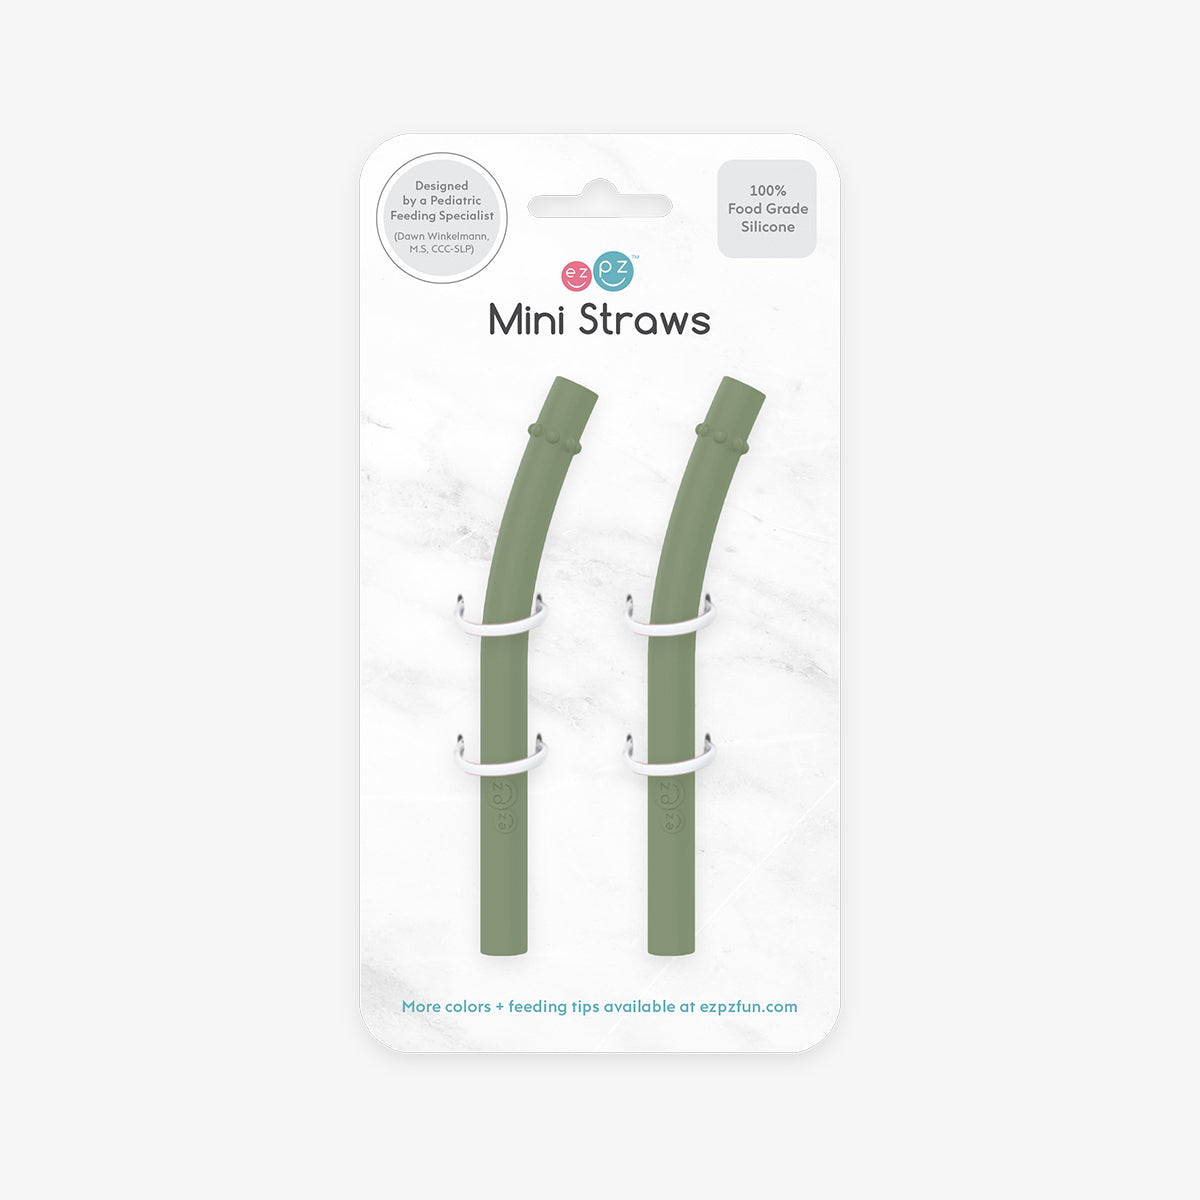 Mini Straws in Olive / Silicone Straw Replacement Pack for the ezpz Mini Cup & Straw System